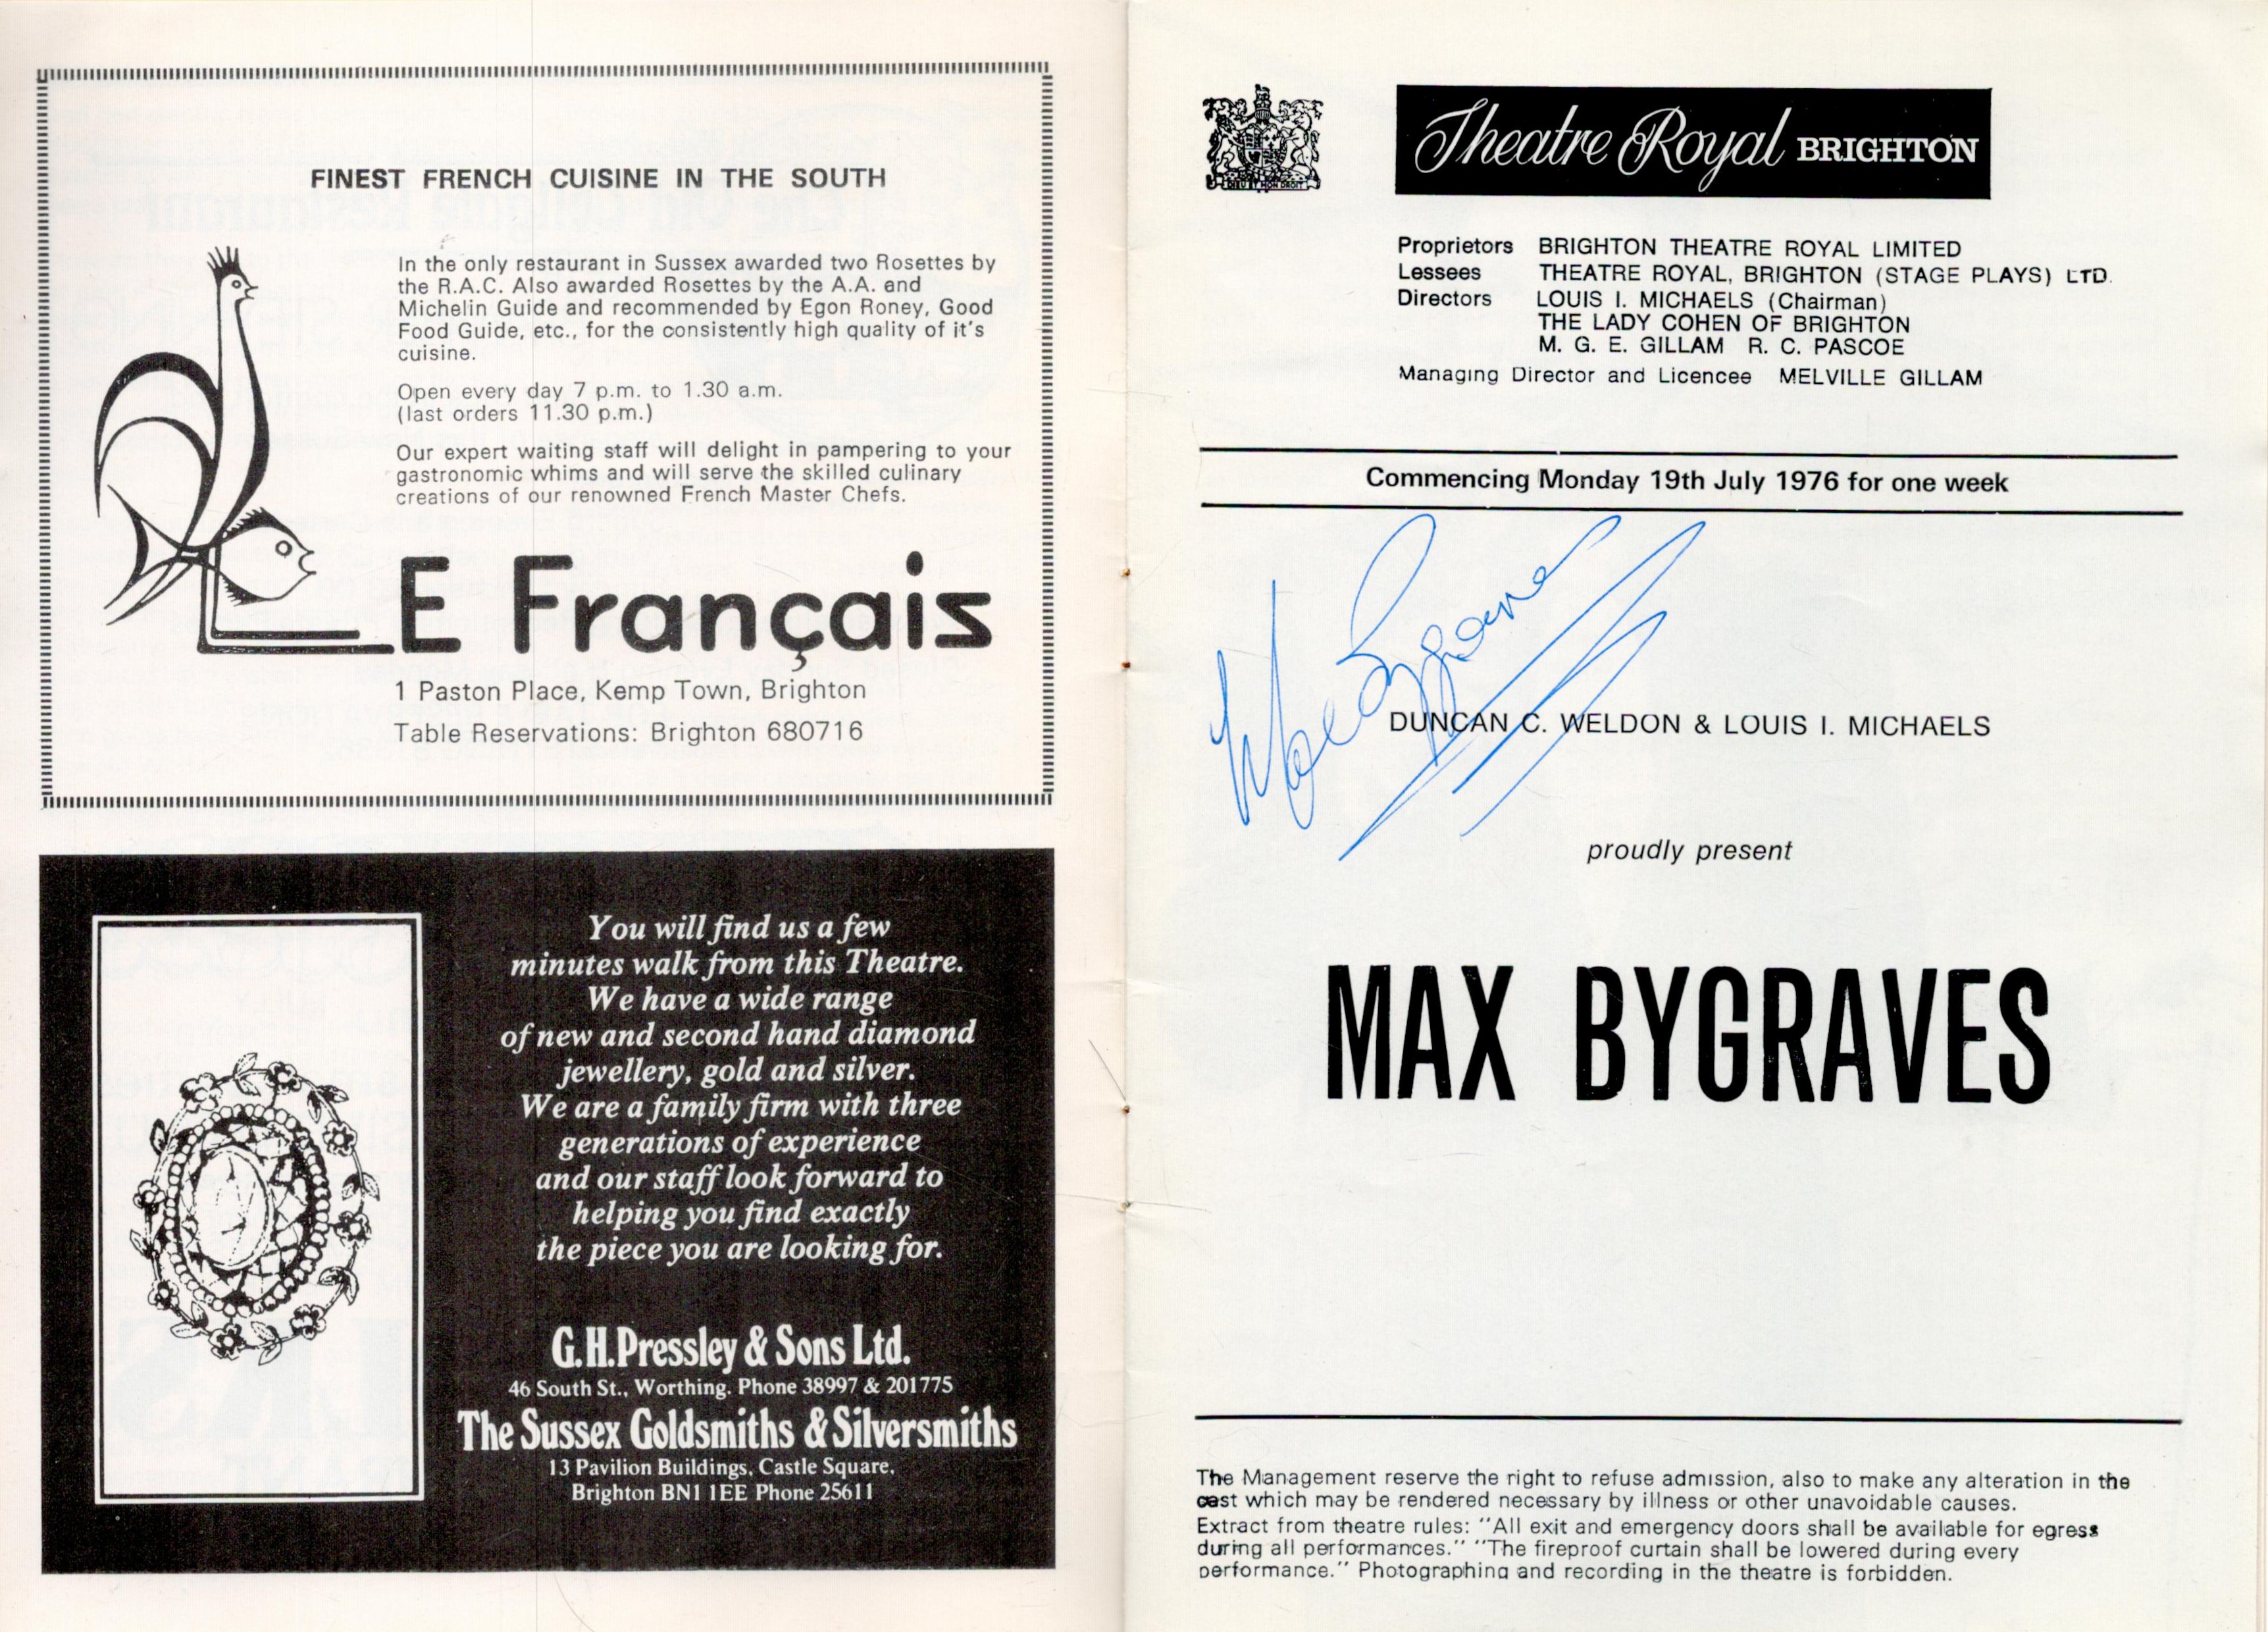 Theatre Royal Brighton programme for Max Bygraves, July 1976. Signed by Max Bygraves. Including 2